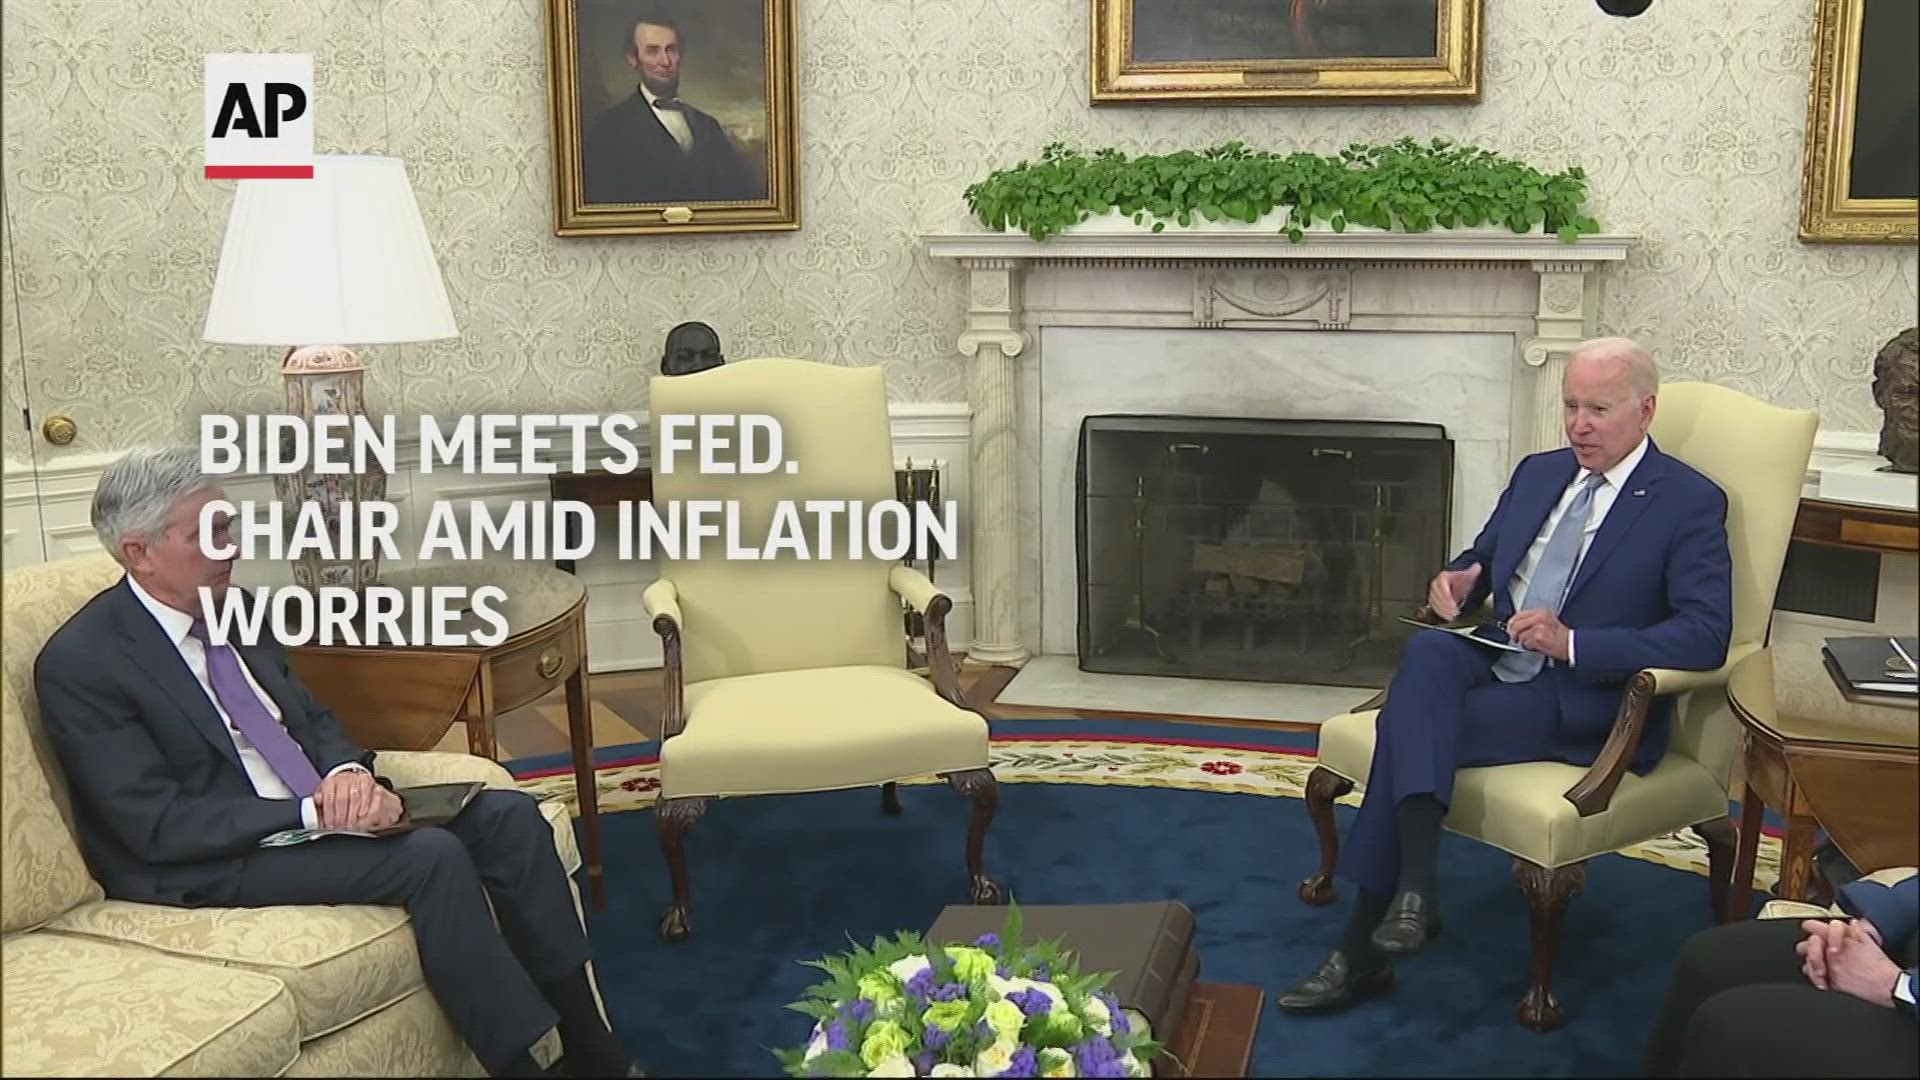 WATCH: "My plan to address inflation starts with simple proposition: Respect the Fed, respect the Fed's independence," Biden said.